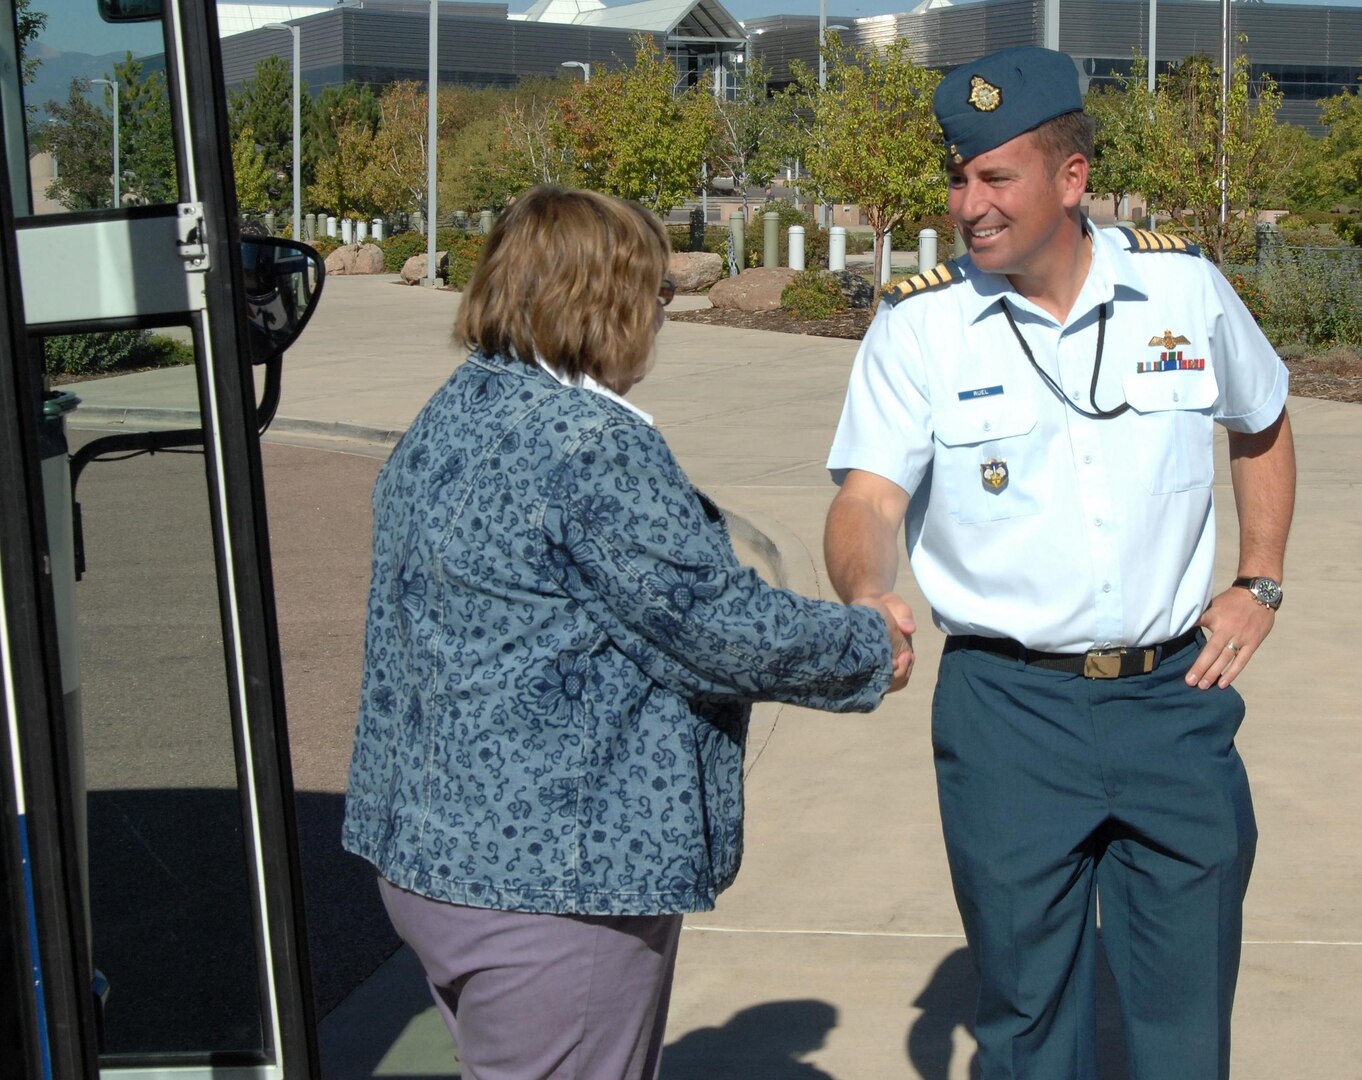 NSBA conference attendees visit NORAD, > U.S. Northern